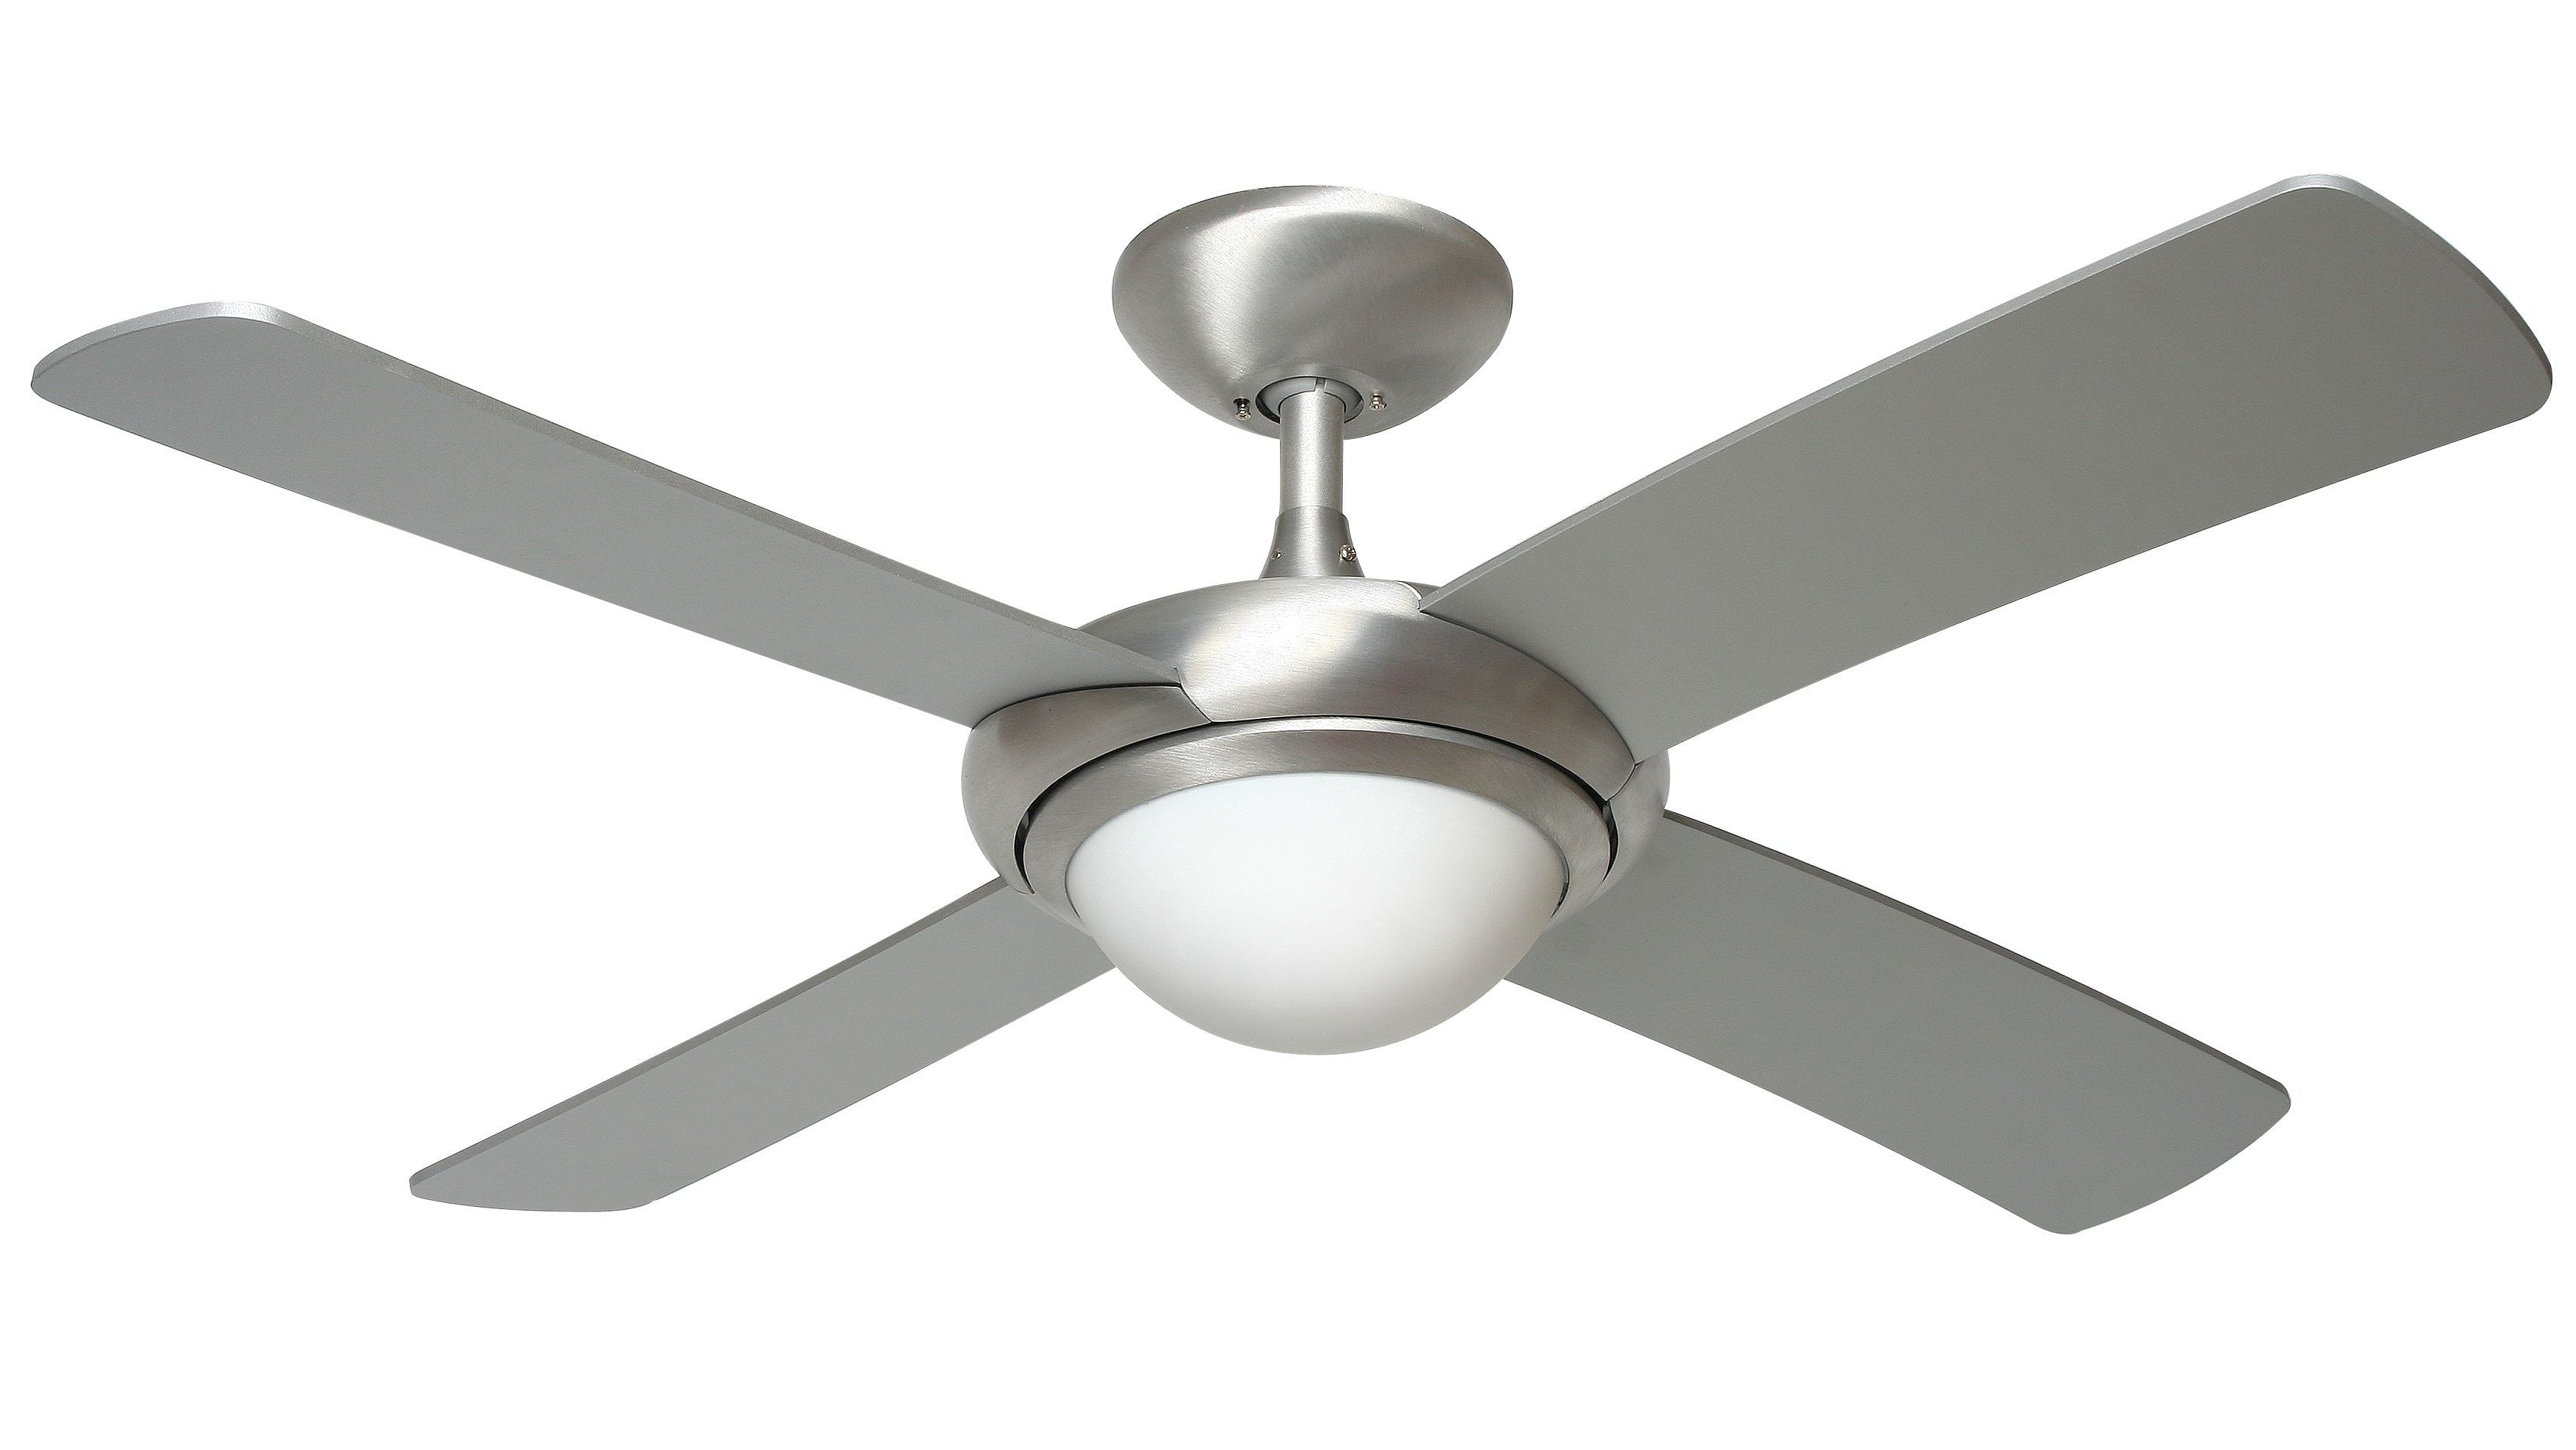 Ceiling Fan Design: Fantasia Orion Brushed Aluminum Remote Control Pertaining To Outdoor Ceiling Fans With Remote Control Lights (View 13 of 15)